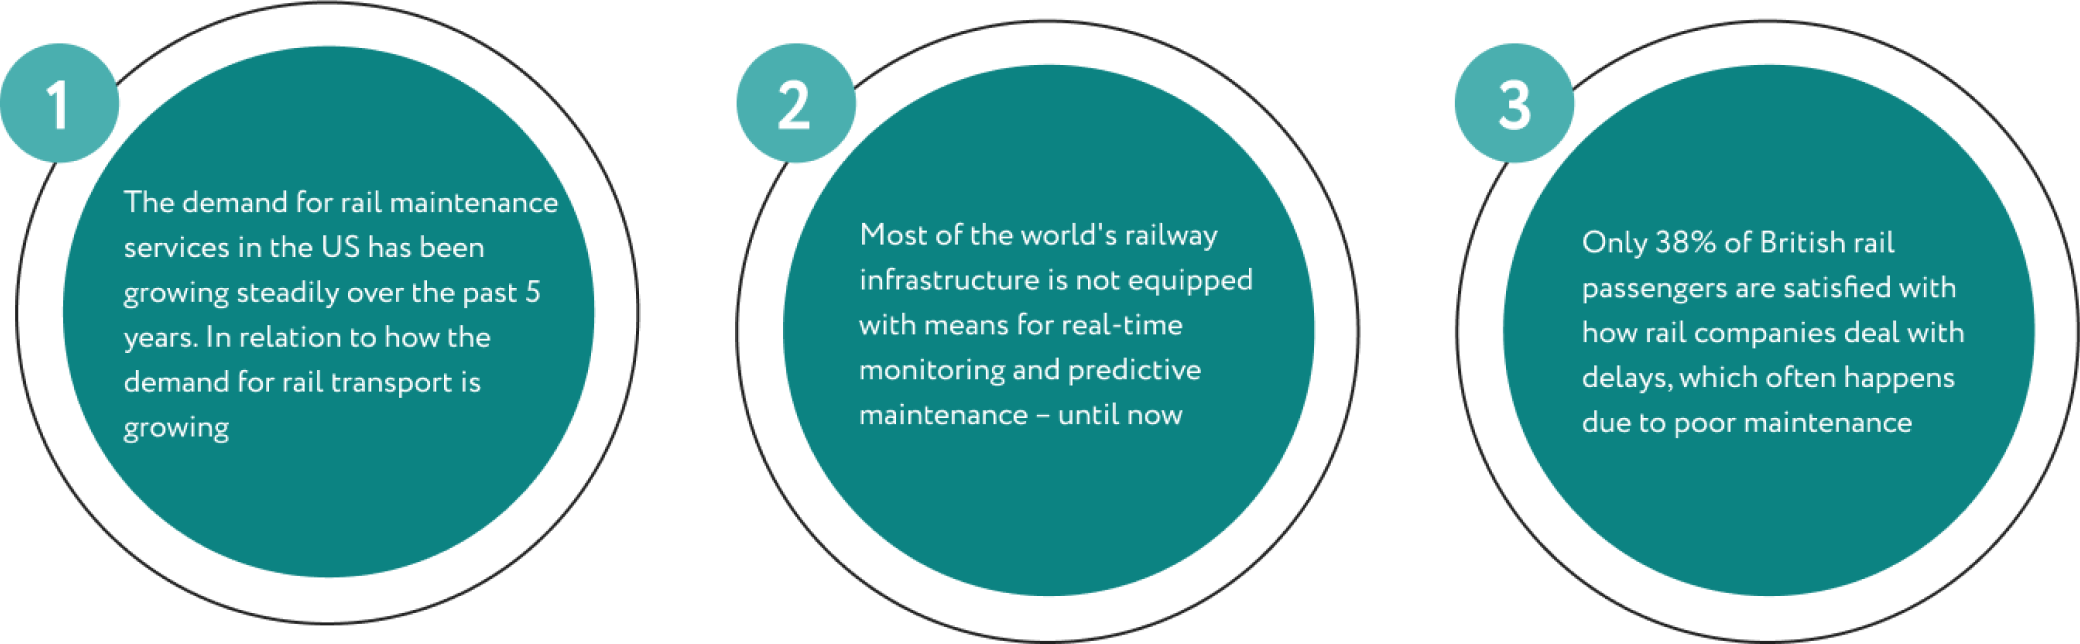 Facts about Railway Maintenance